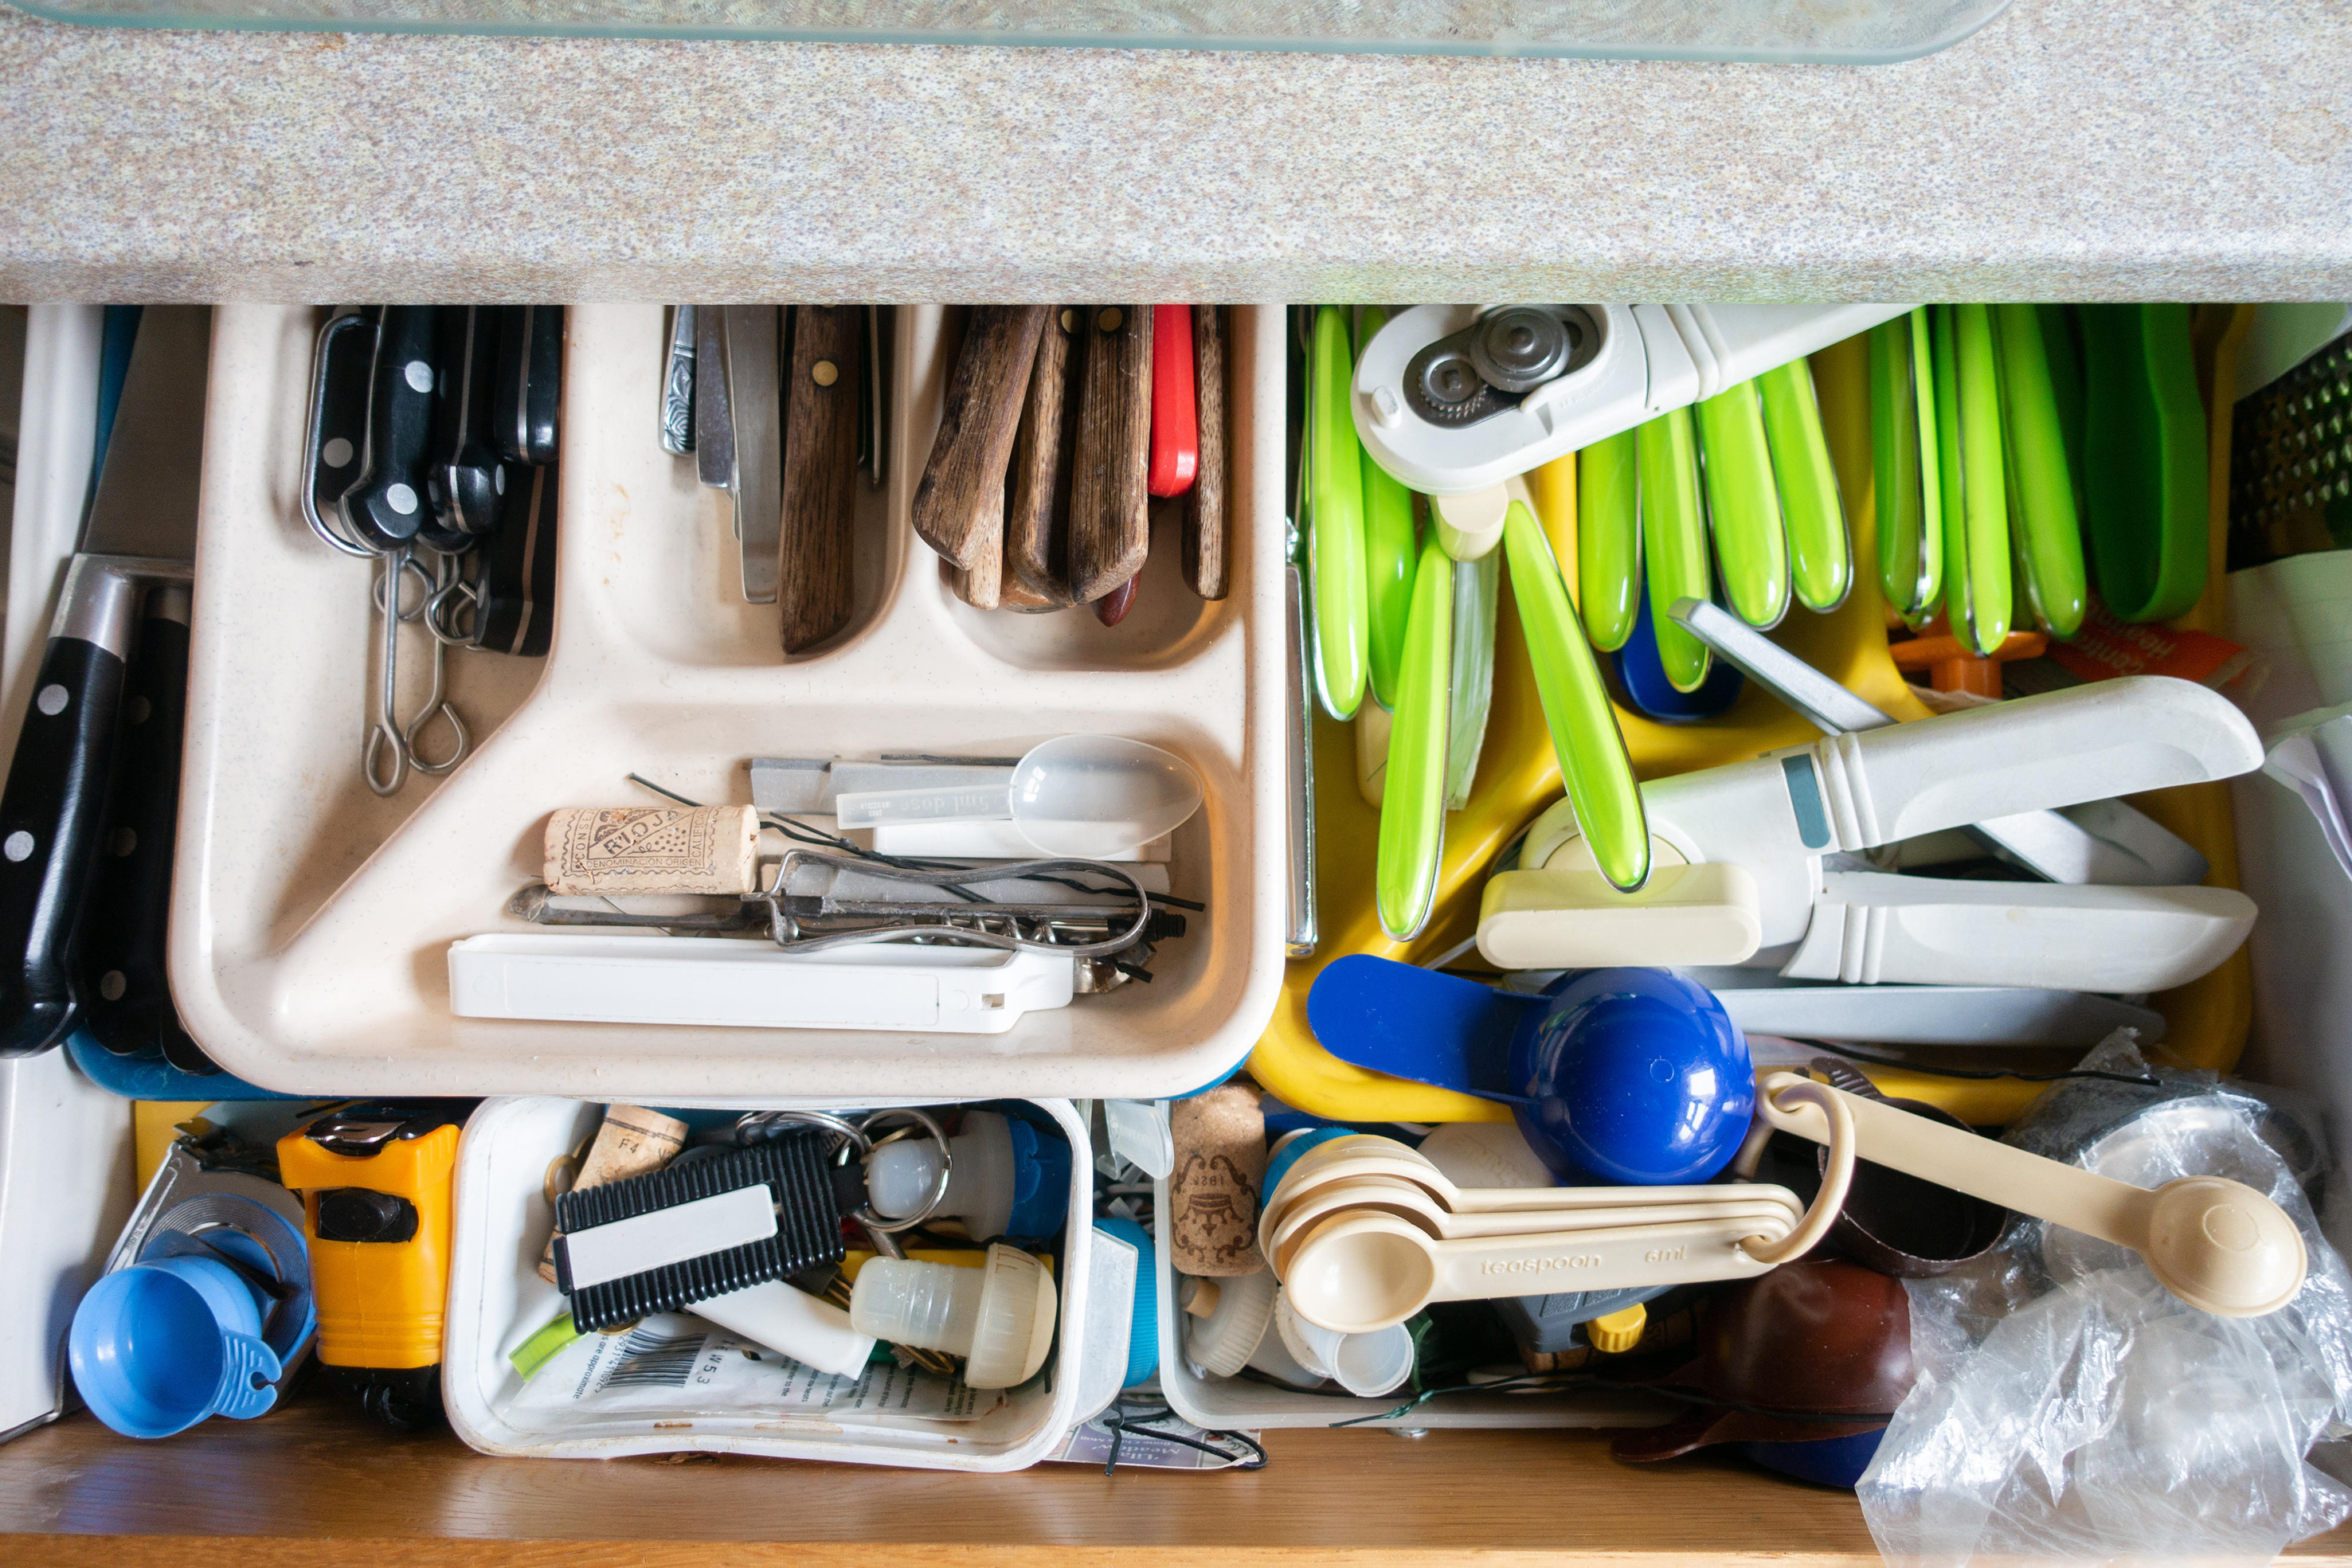 Contents of a cluttered kitchen drawer